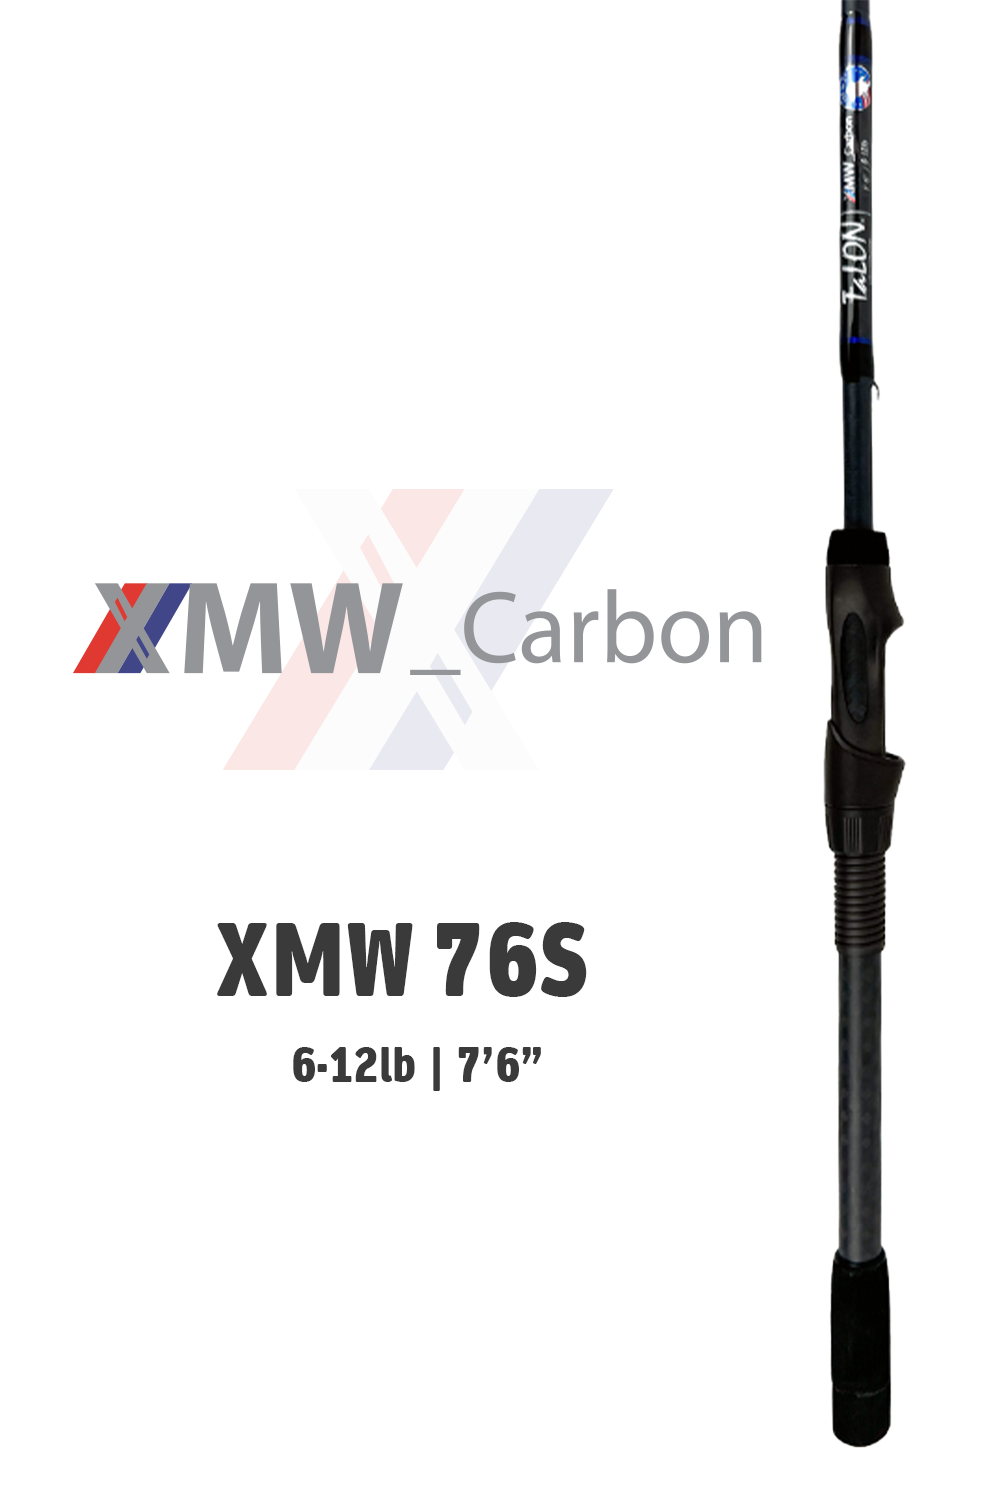 XMW_Carbon - Spinning | 6-12lbs - 7'6"